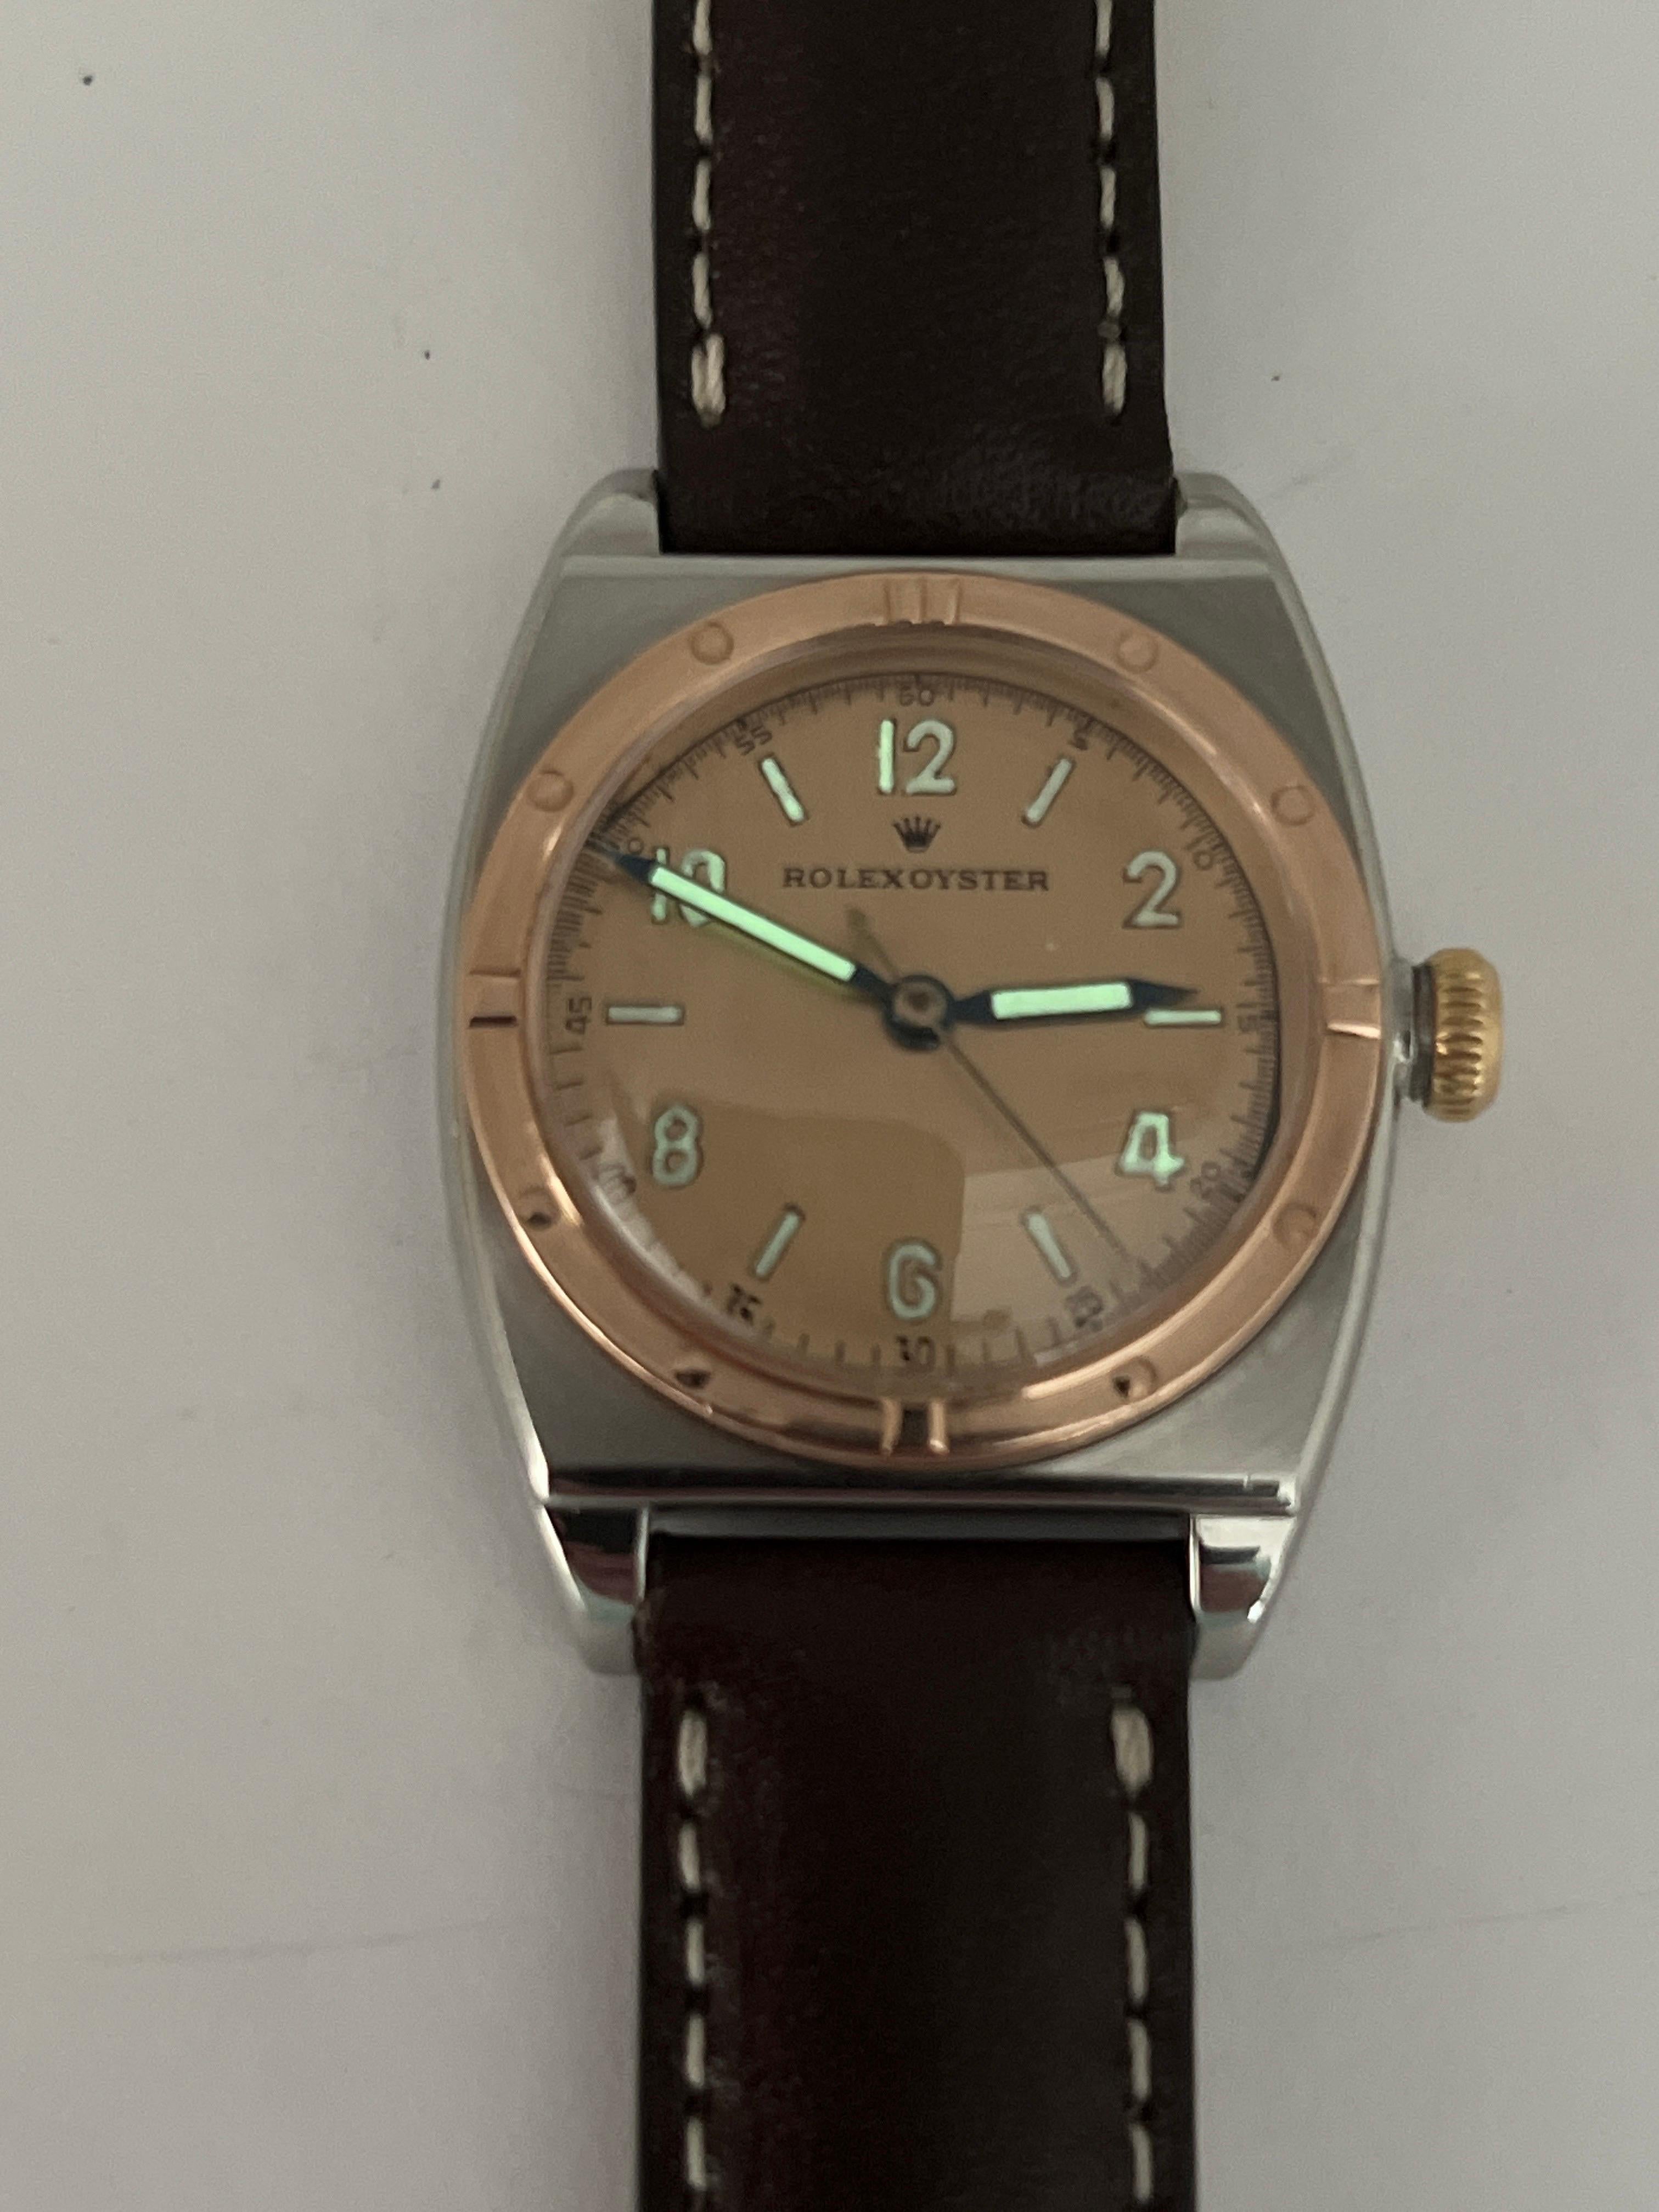 But first, I have a shameless plug! My shop was recently selected to supply vintage American watches for a premier movie starring some major actors and a world famous director. They were looking for authentic watches that would represent the time